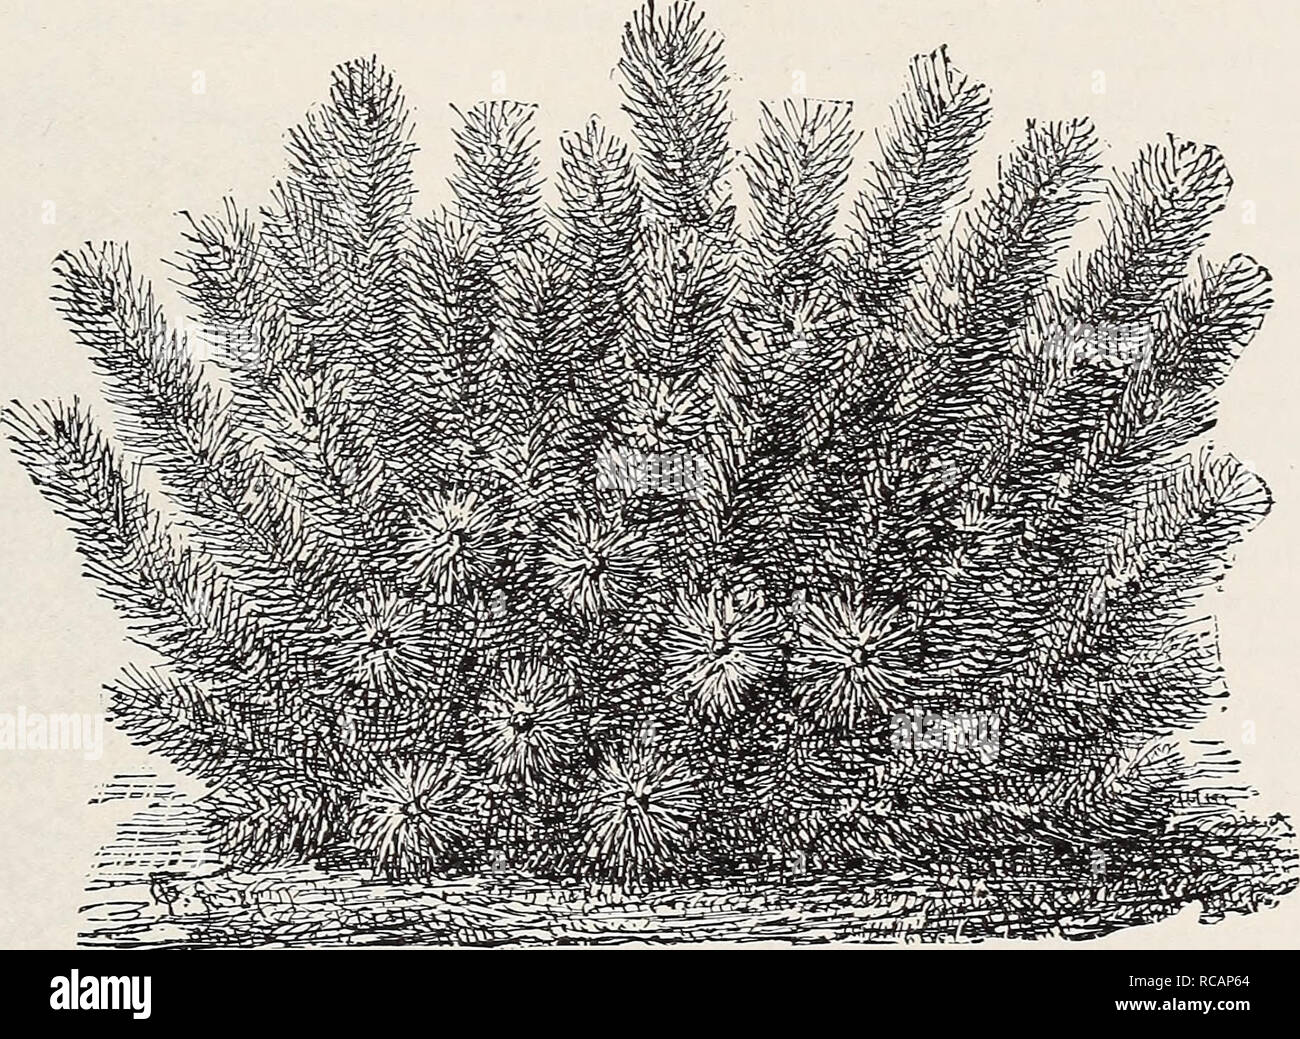 . Ellwanger &amp; Barry's general catalogue : Mount Hope nurseries. GENERAL CATALOGUE. 7&amp; + Pinus. M. var. rotundata. C. Of raore upright growth than the dwarf, and with roundish cones. It is a native of Tyrol, where it forms a small tree. $1.00. tP. Monspeliensis. Salzmann's Pine. B. From Europe. A noble tree; leaves six to seven inches long and of a bright green color; branches are stout, numerous, and thickly covered with foliage. A vigorous, spreading and picturesque form. $1.50. P. Pallasiana. B. A large pyramidal tree with shining dark leaves, perfectly hardy. Valuable. $1.00 to $3.0 Stock Photo